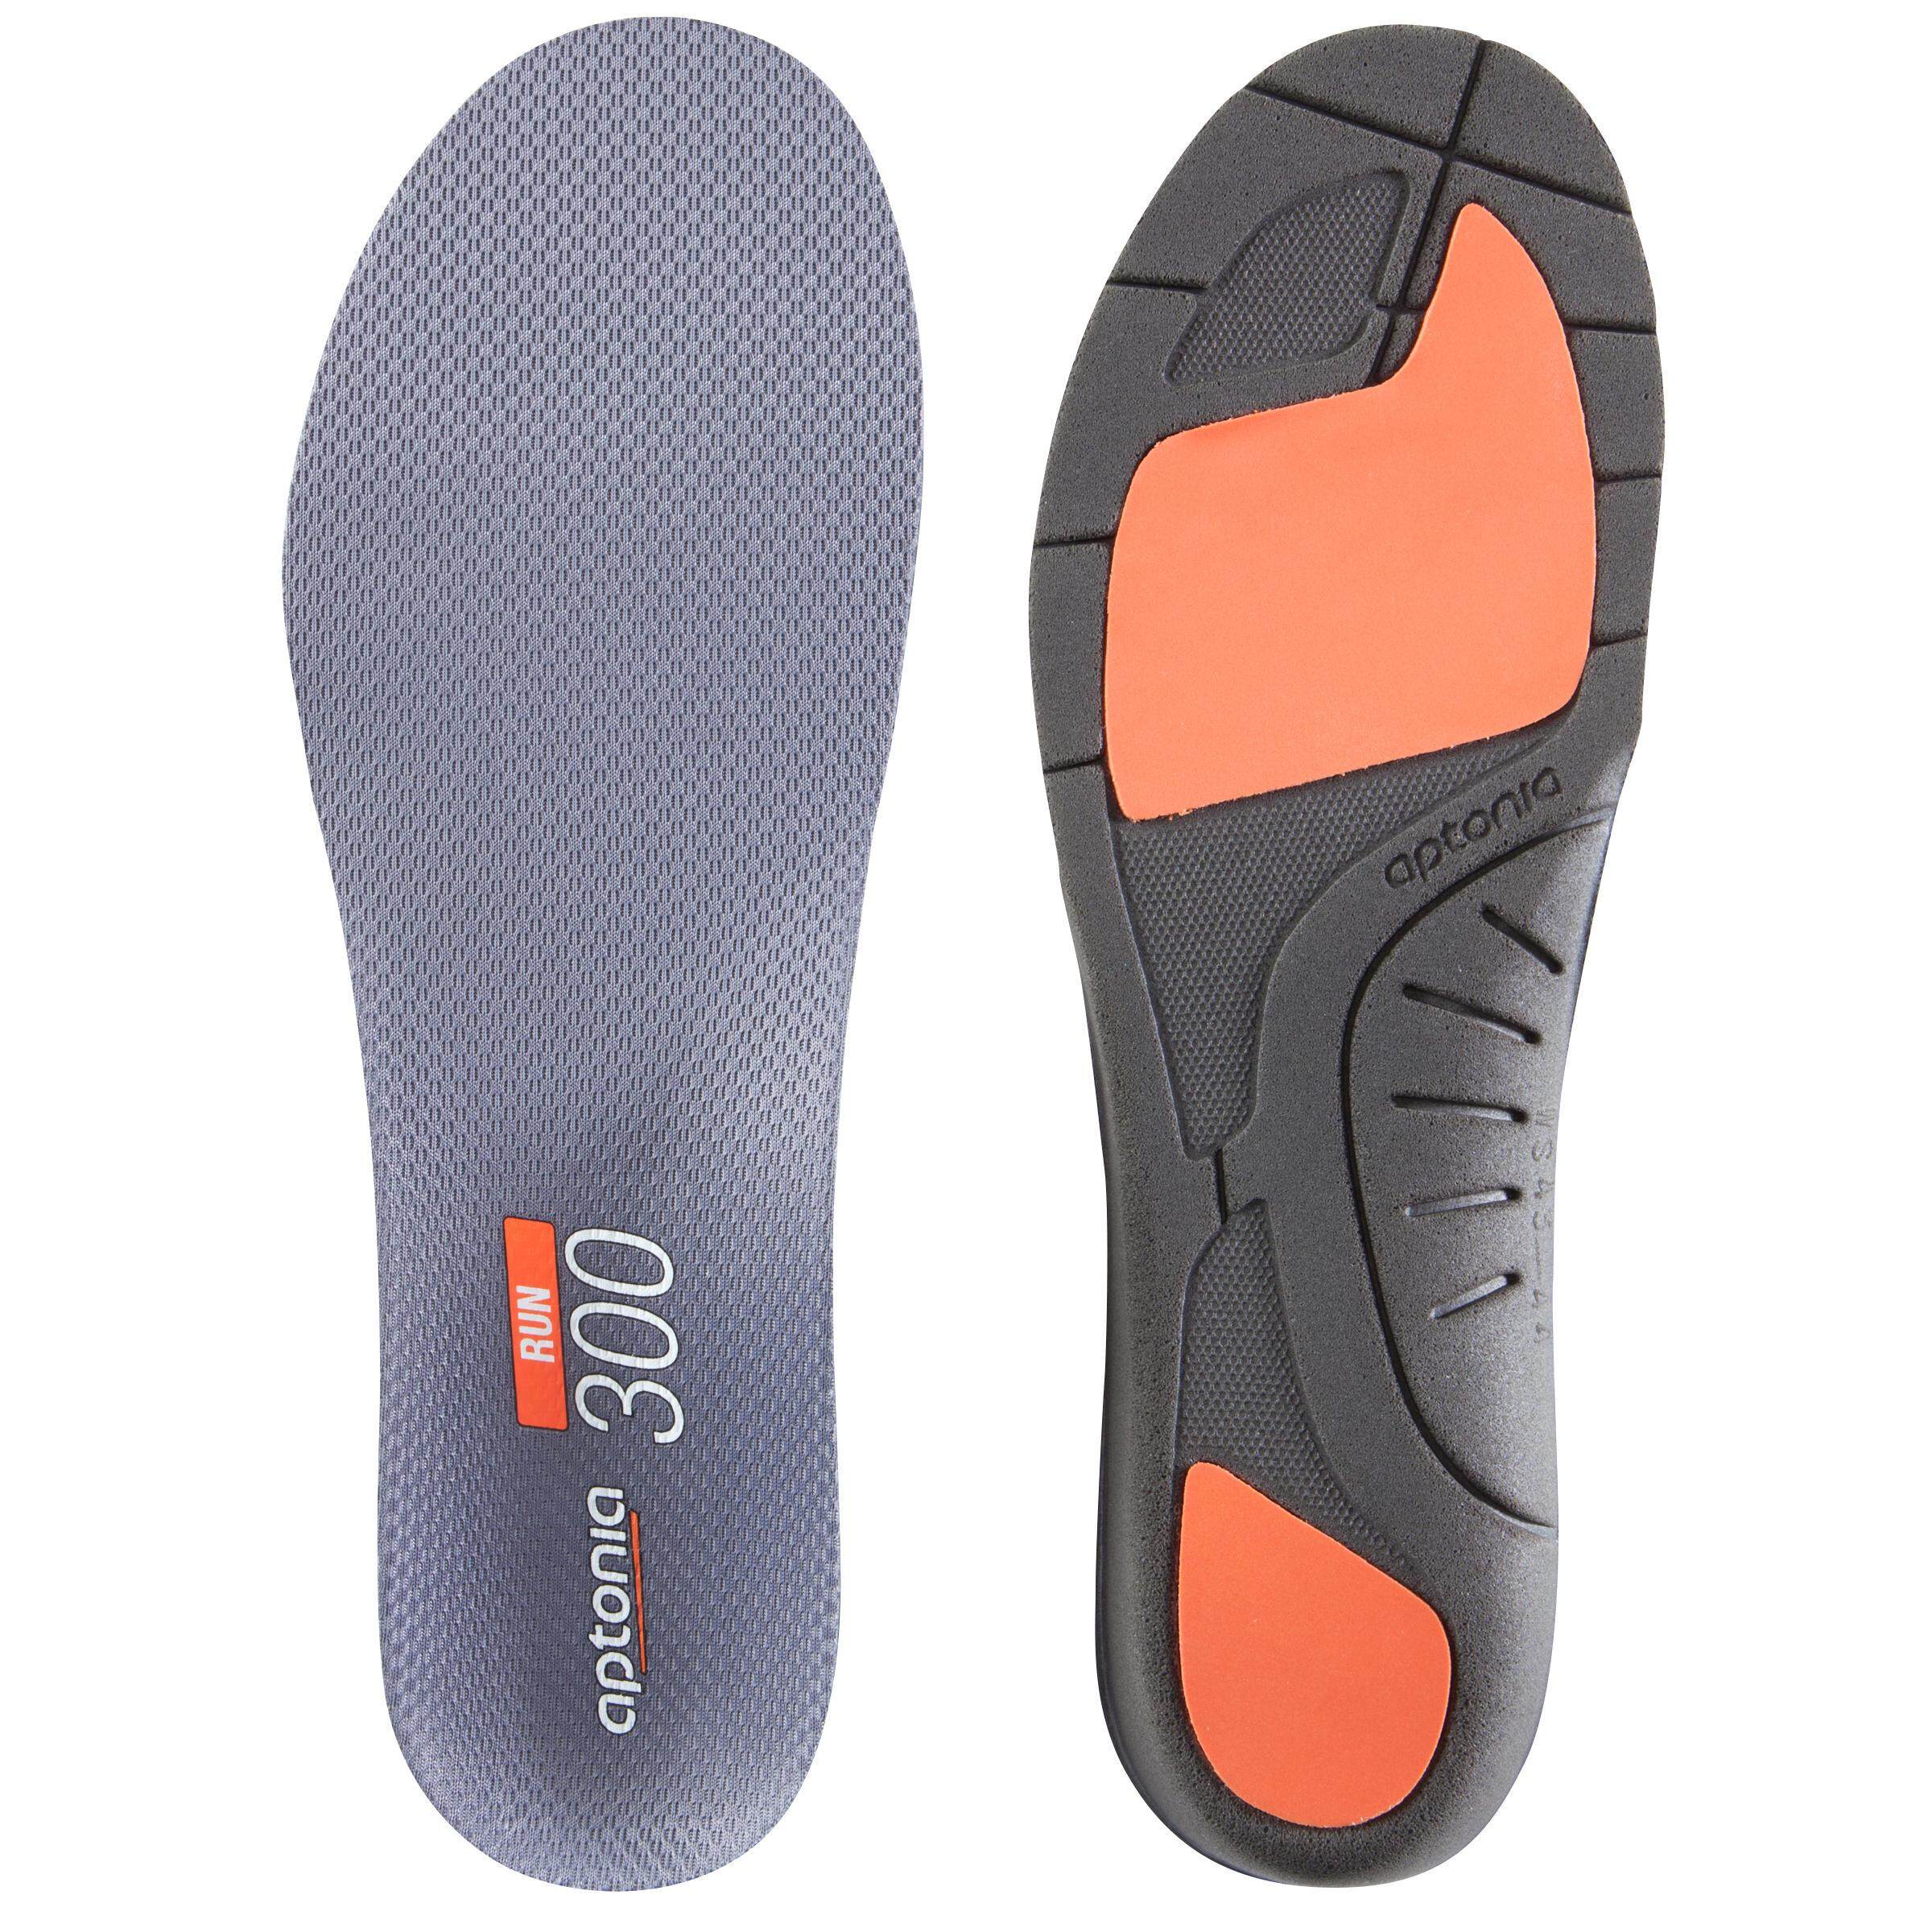 [Best Deal !!] RUN 300 INSOLES - GREY for JOGGING ROAD RUNNING